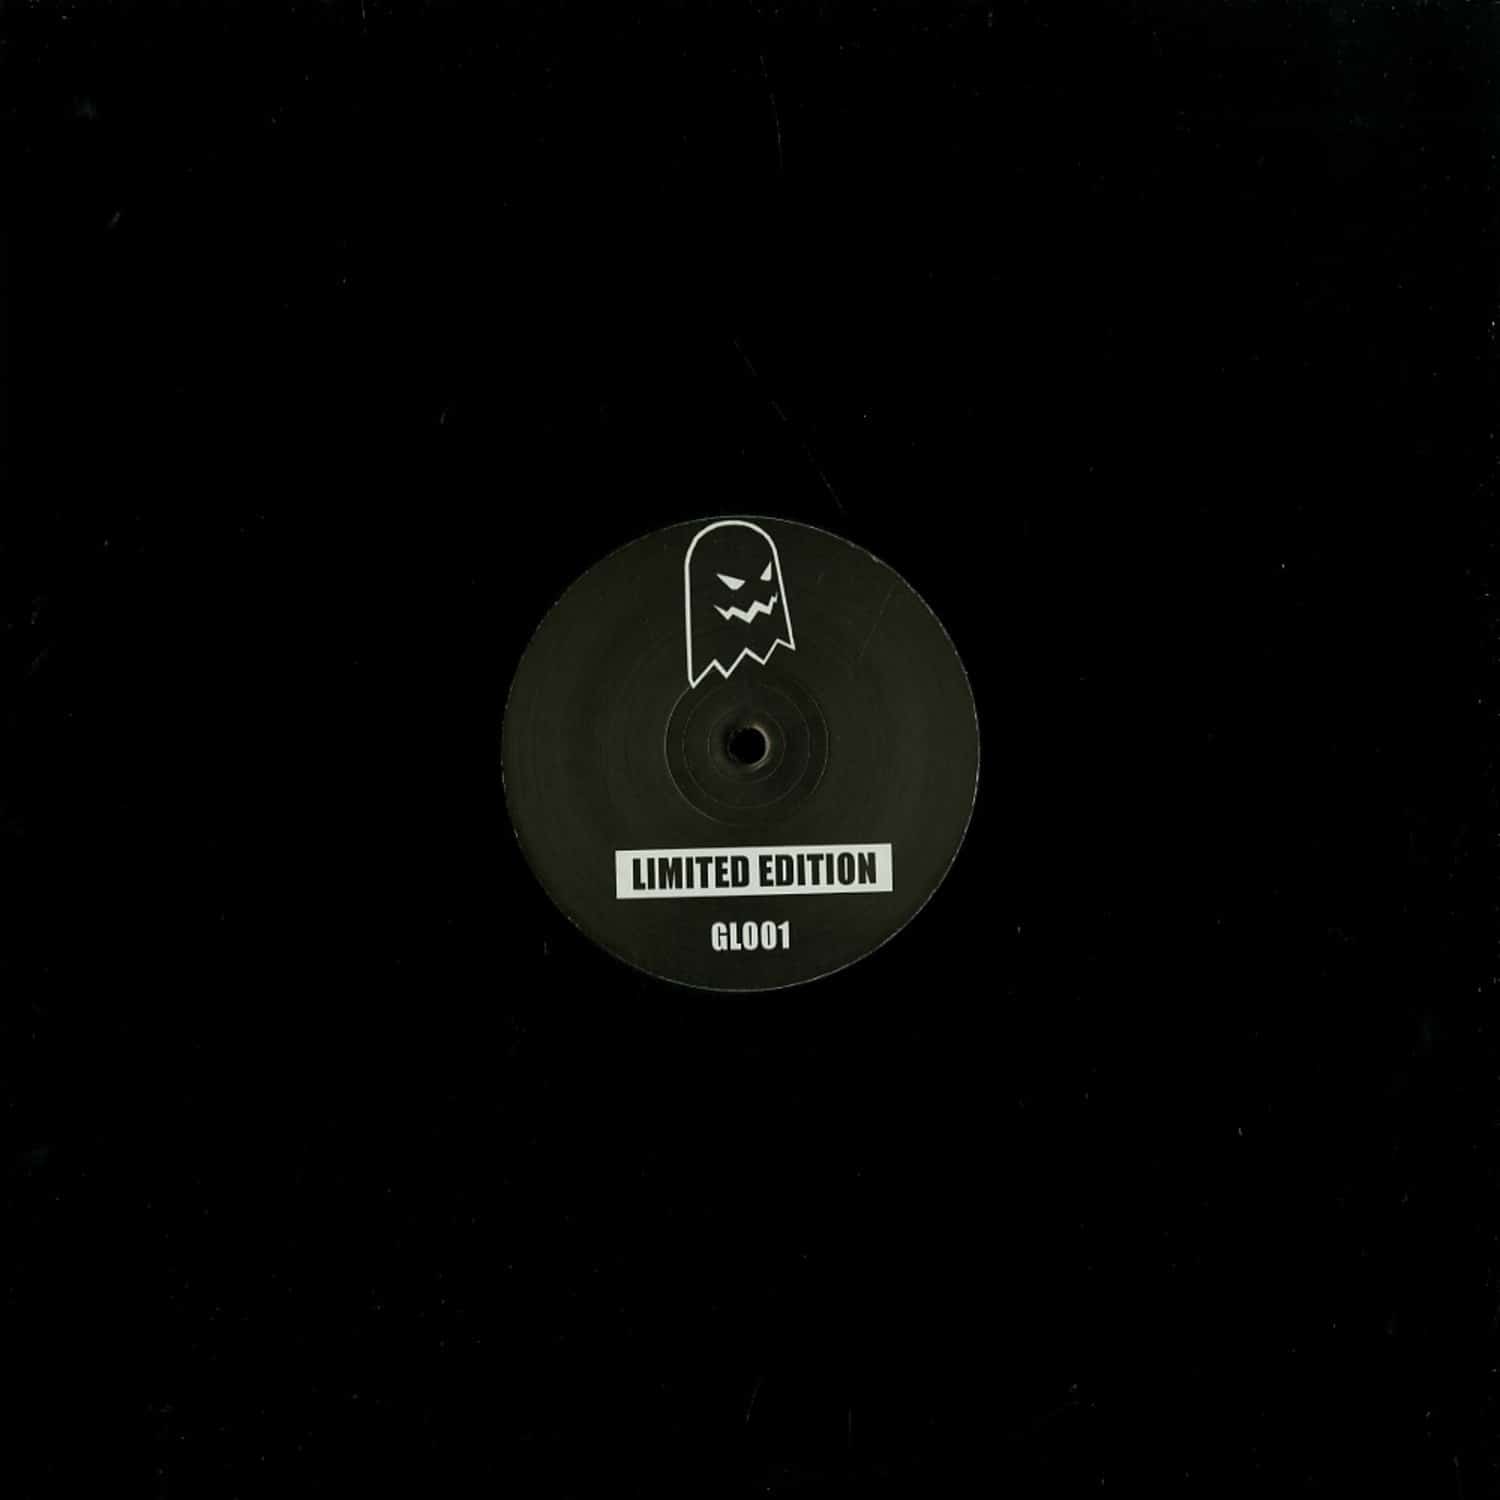 Opus / El-B & Filth Arris - I M GOING IN / WHERE I LIVE